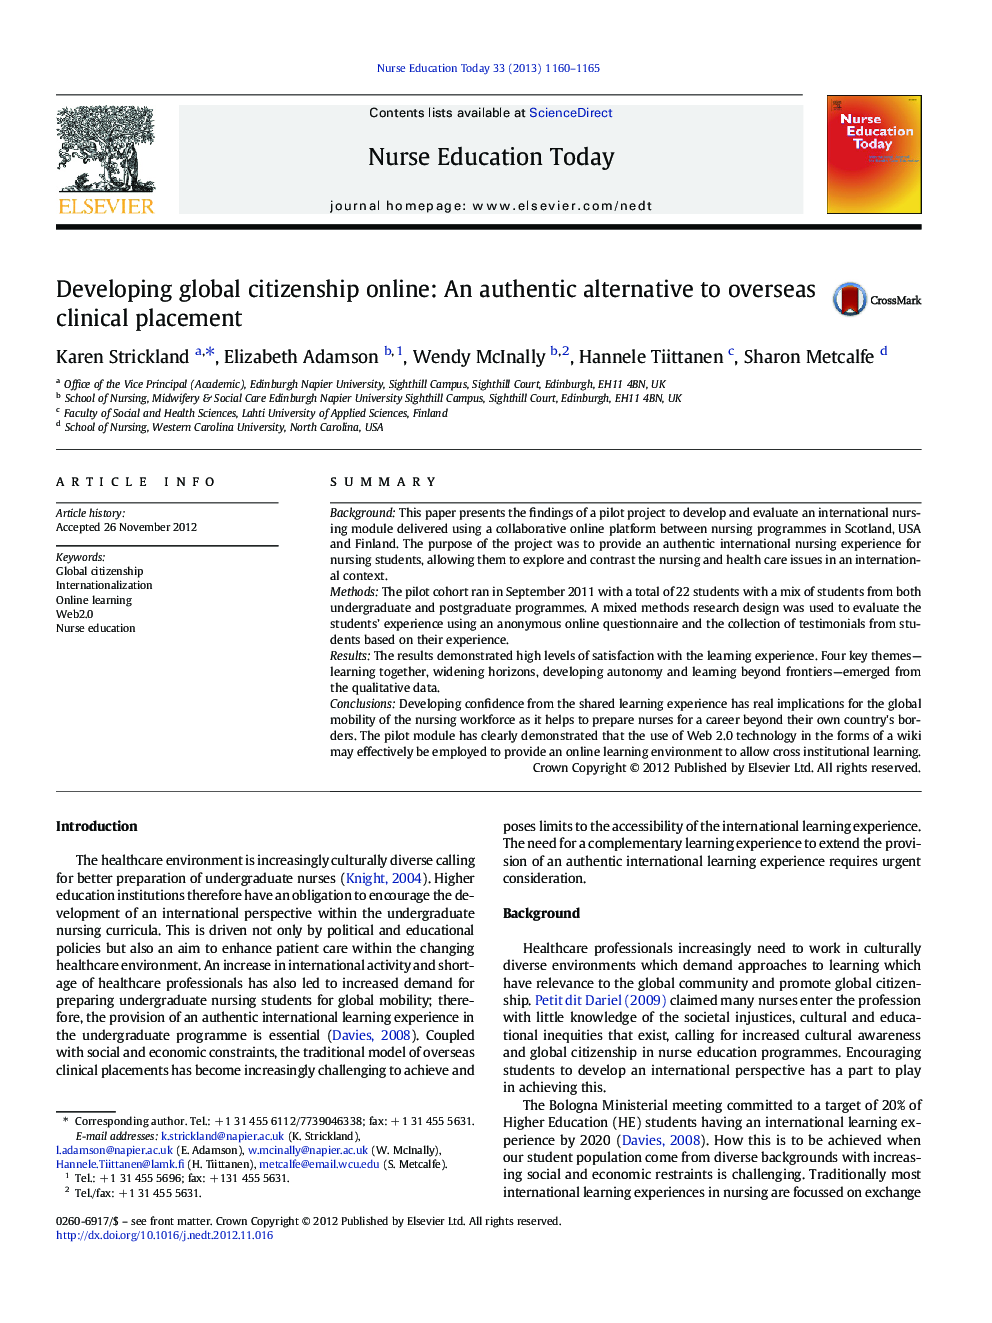 Developing global citizenship online: An authentic alternative to overseas clinical placement